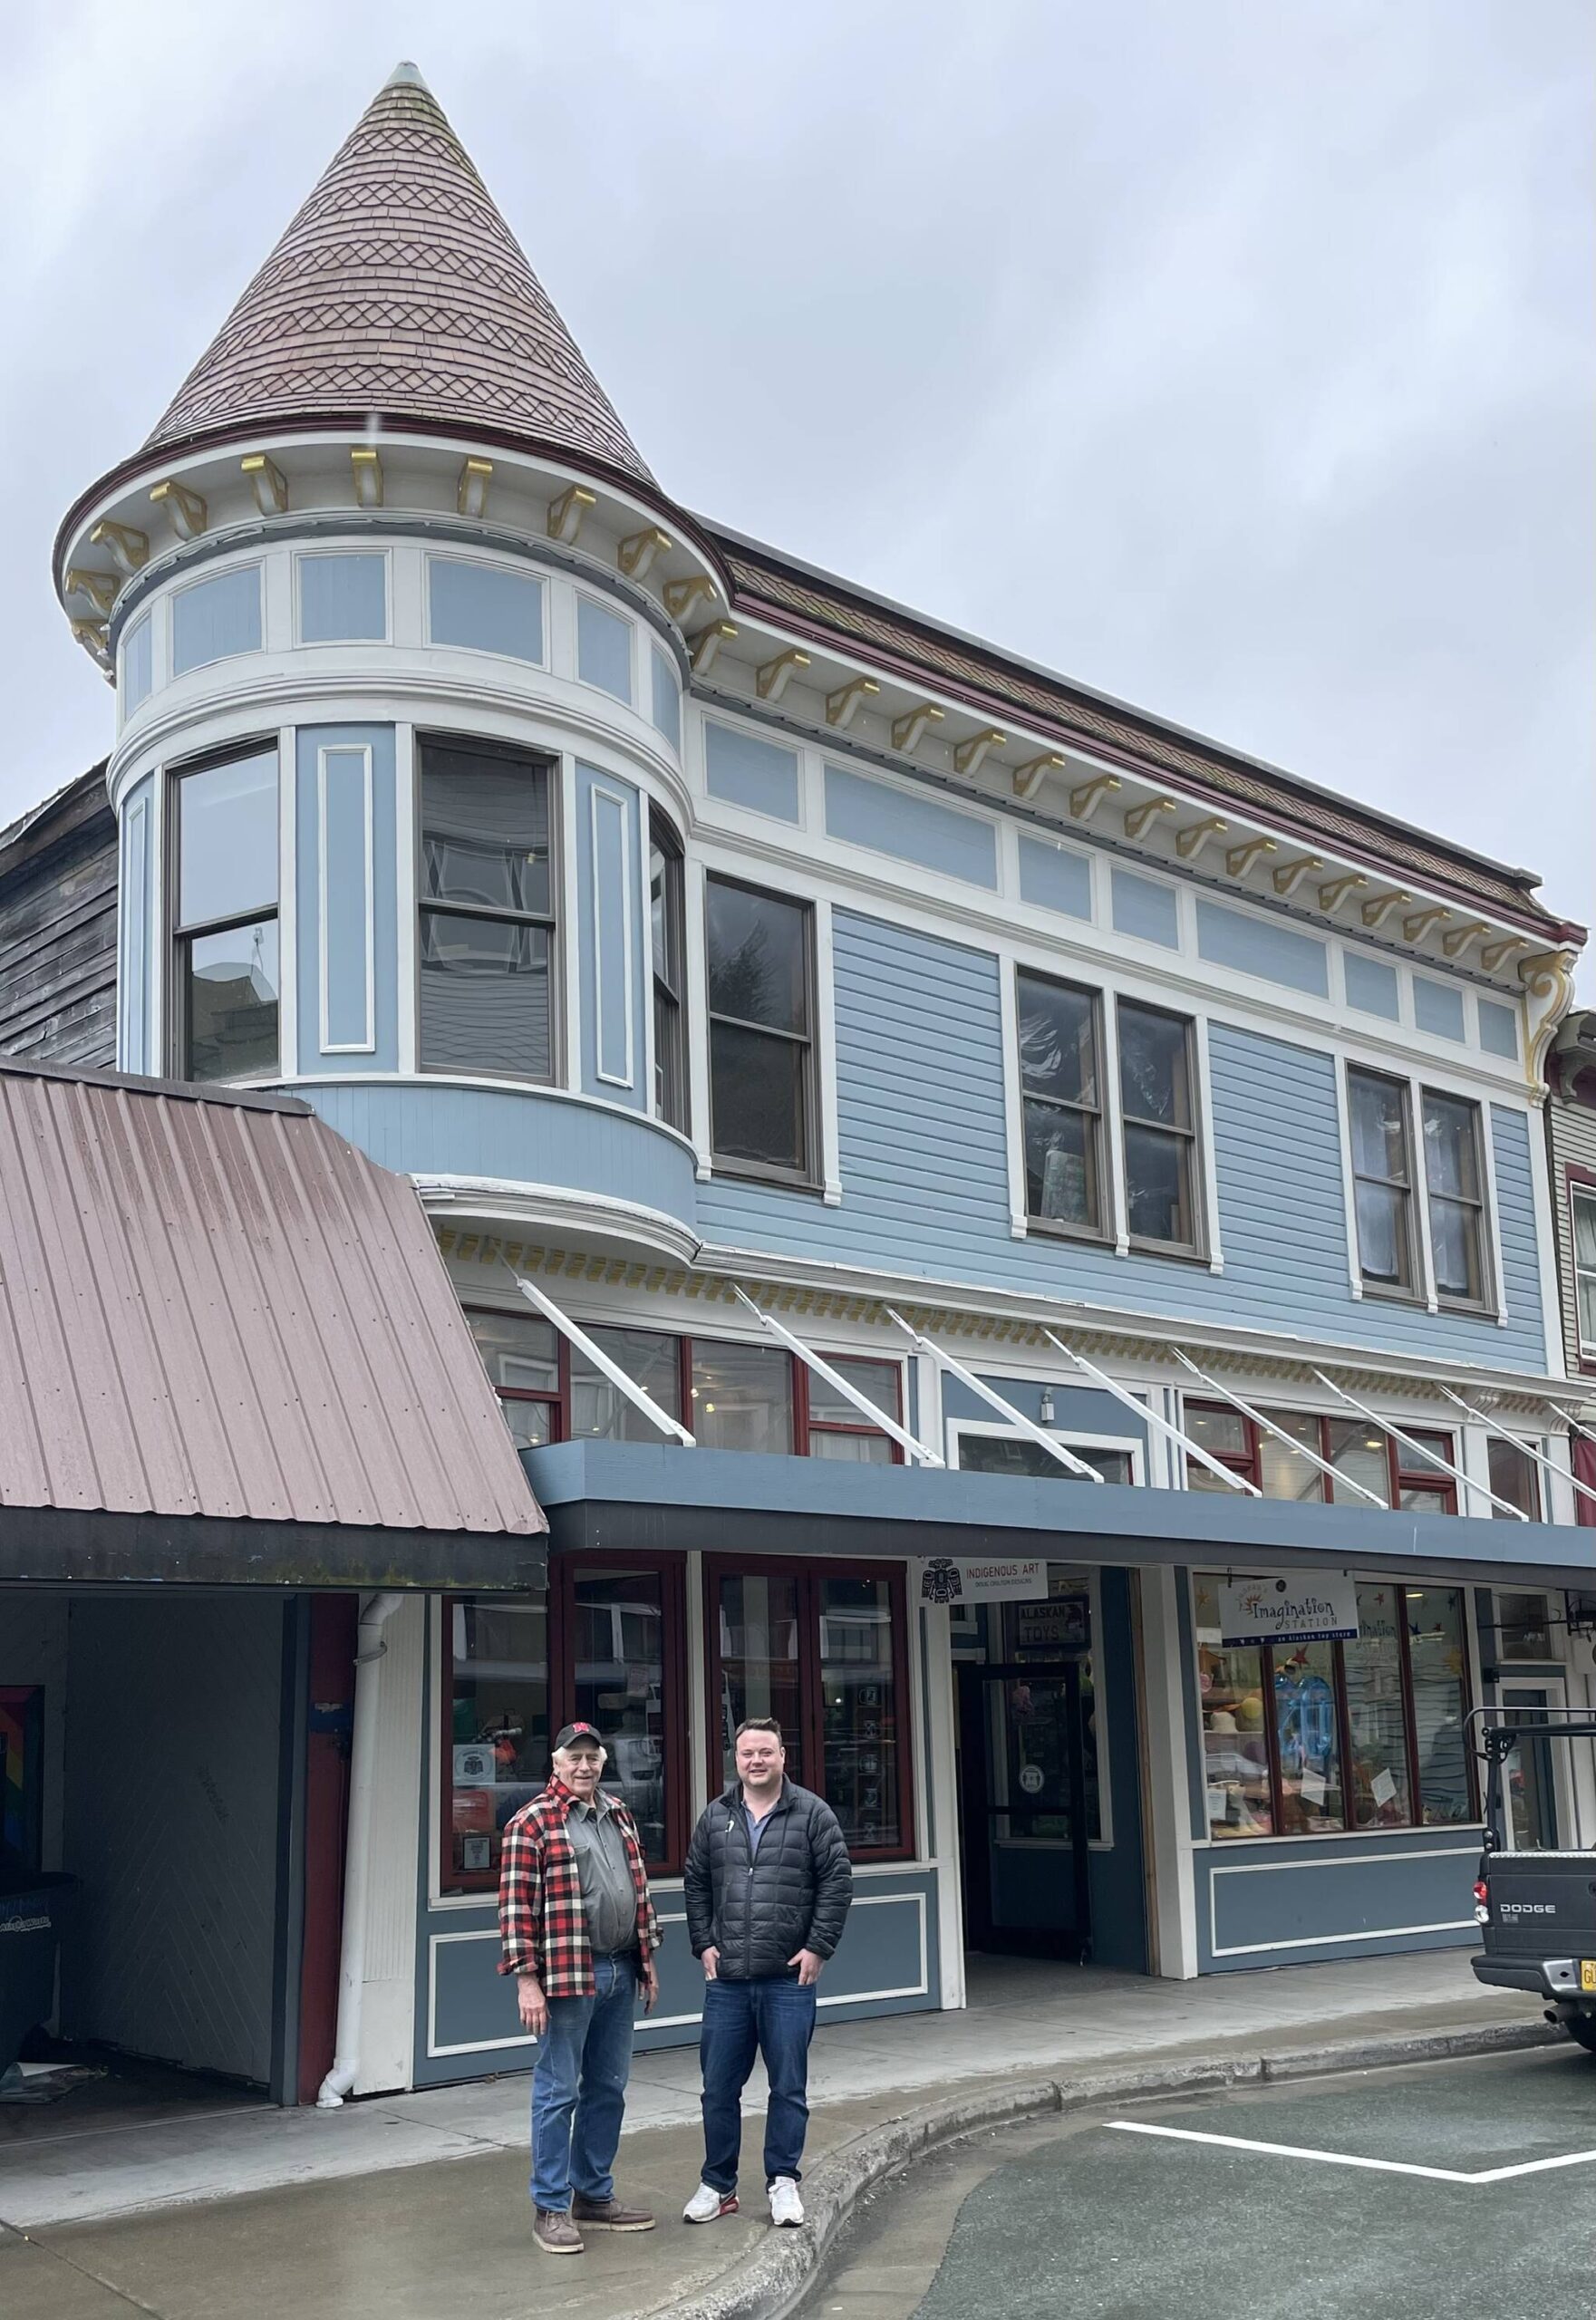 Neil MacKinnon and Jared Cure’ stand outside Juneau’s most recognizable historic building in April 2023. MacKinnon’s great-grandparents built the Alaska Steam Laundry in 1901. After several generations, MacKinnon sold the building to well-known local entrepreneur Jared Cure’ two months before COVID. (Laurie Craig / For the Downtown Business Association)